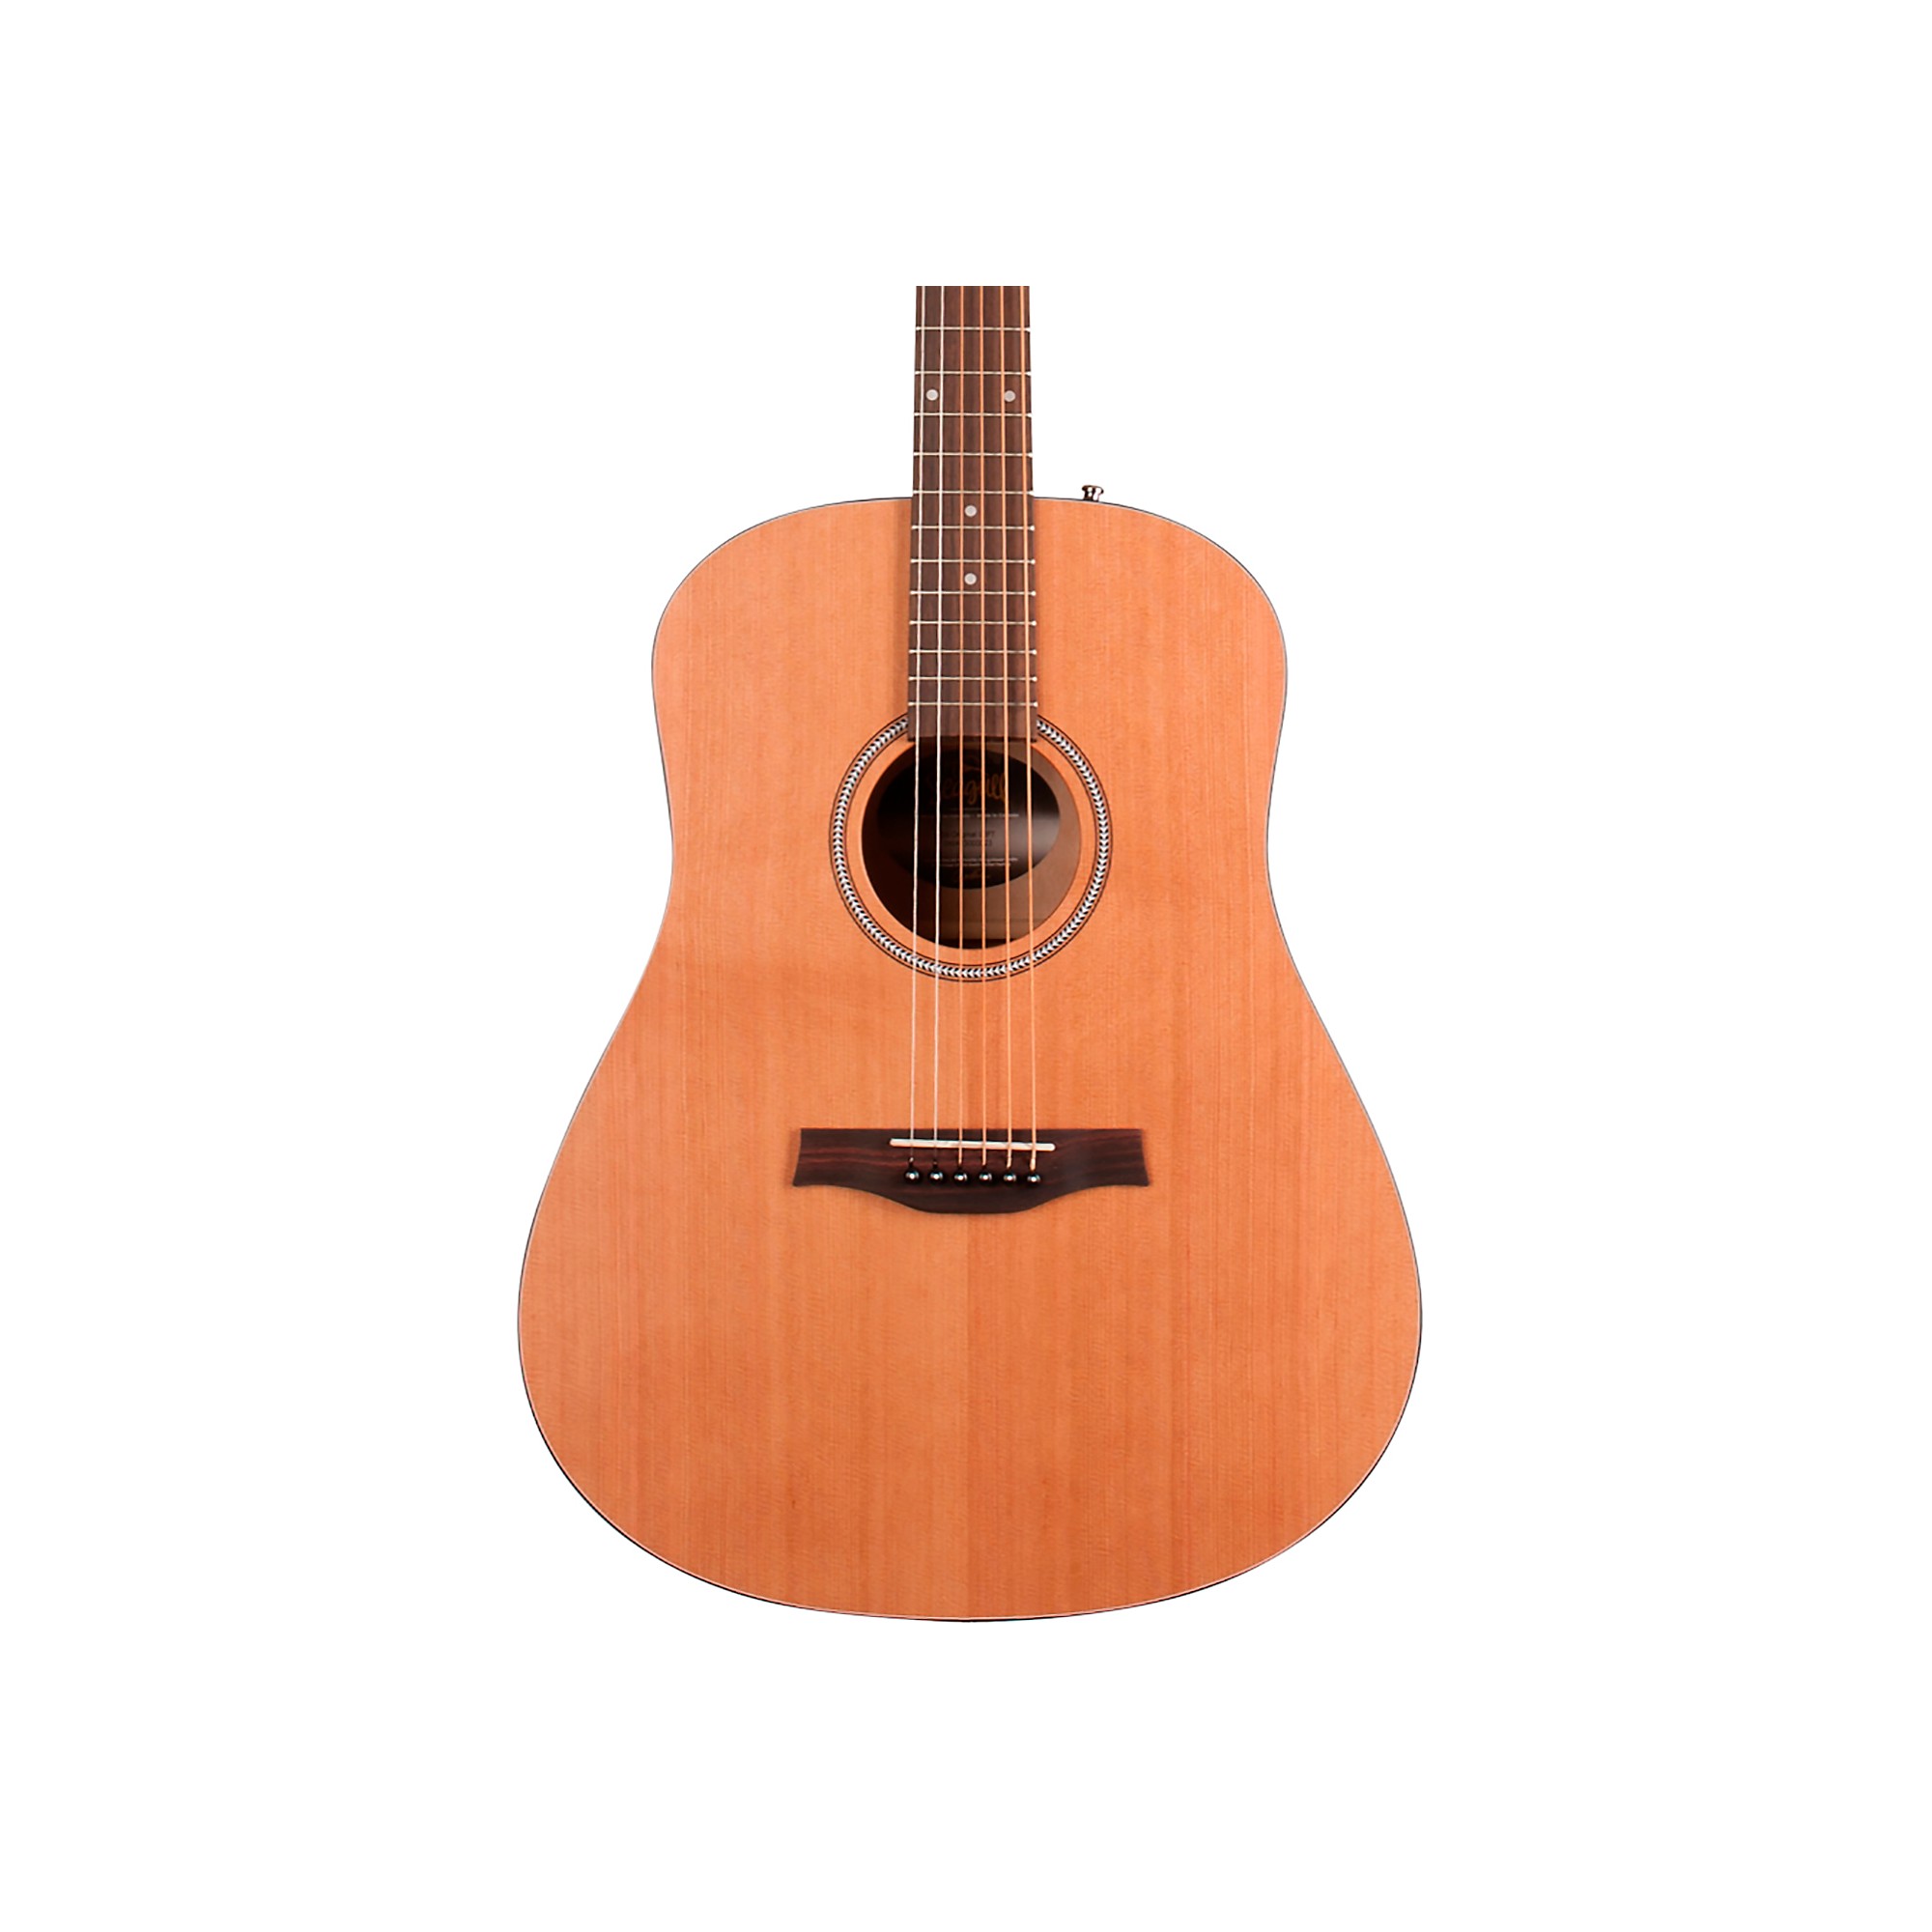 Seagull Seagull S6 Original Presys II Left-Handed Dreadnought  Acoustic-Electric Guitar